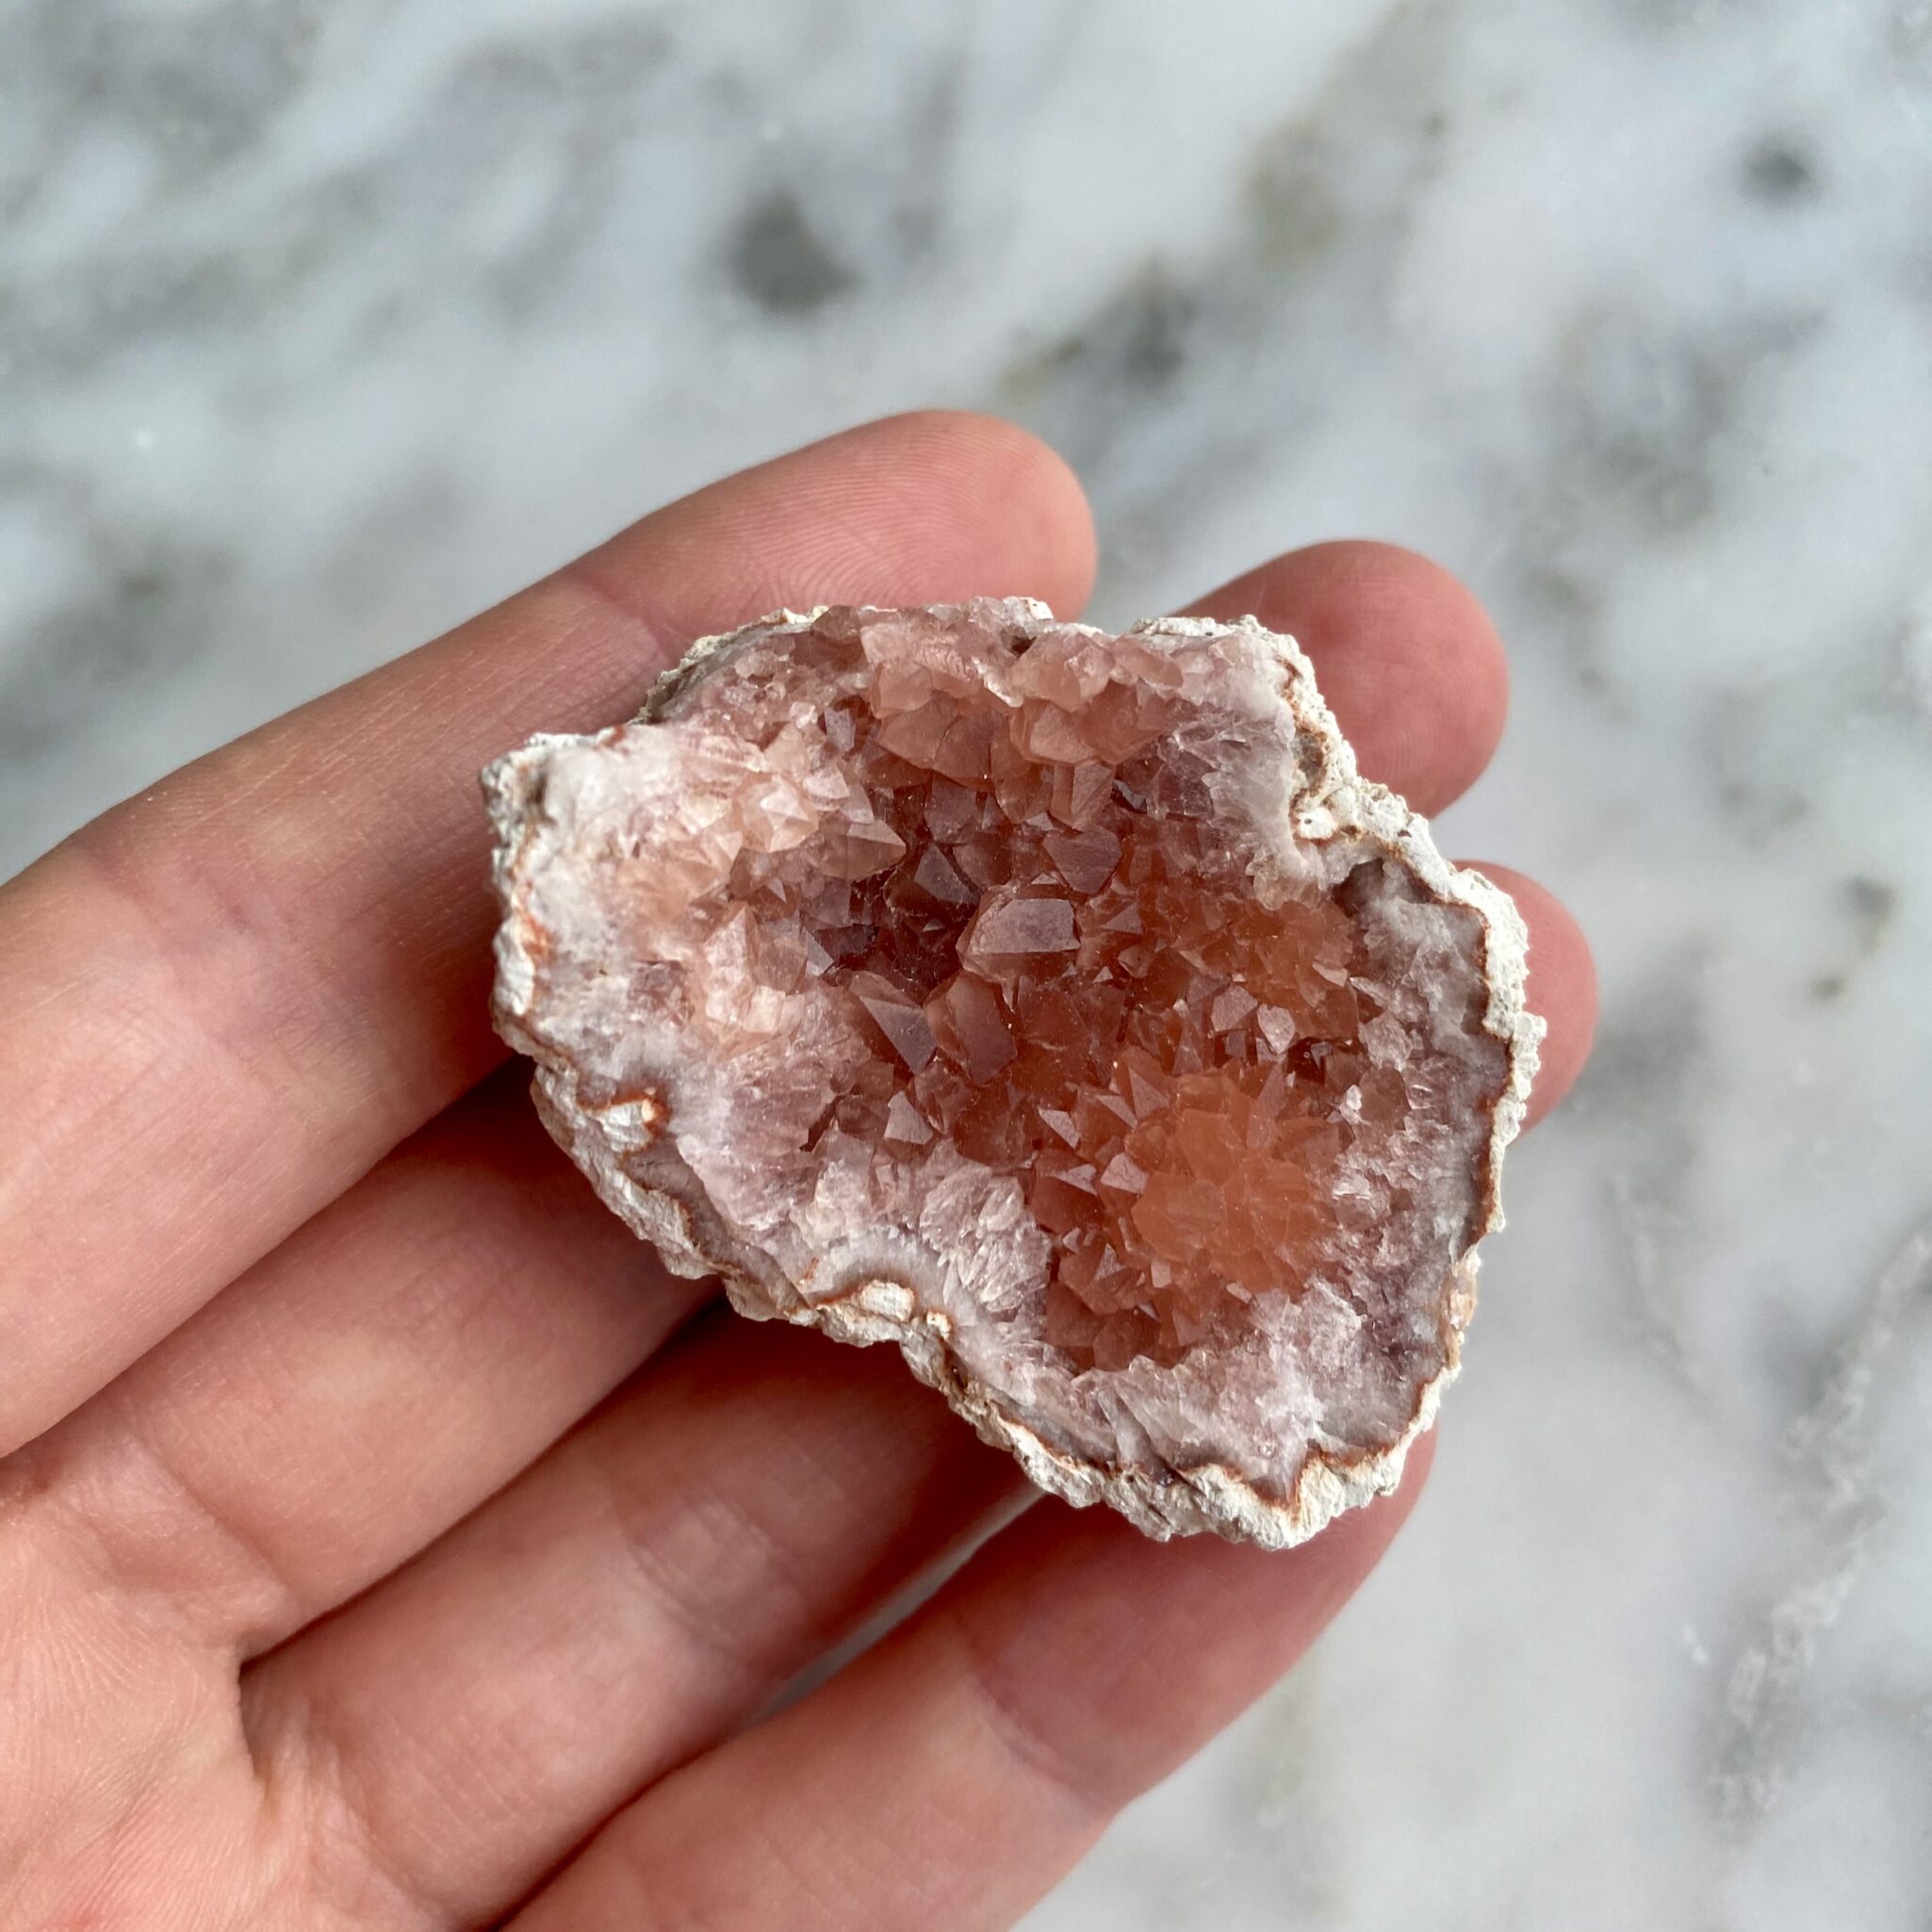 pink amethyst from patagonia, argentina - améthyste rose de patagonie, argentine